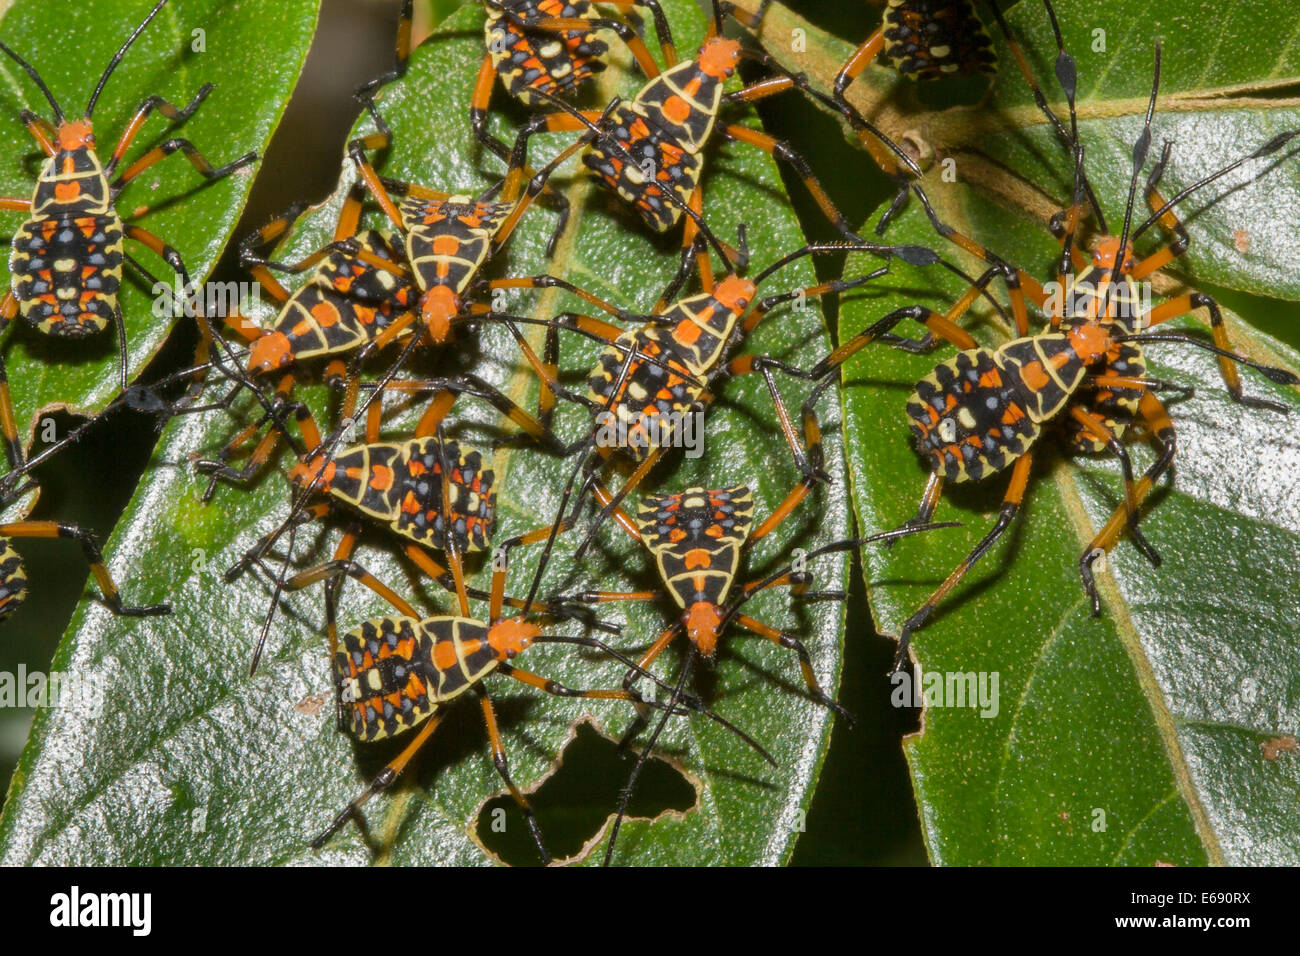 Vivid coloration of Hemipteran nymphs. These bright colors likely advertise their toxicity, an excellent example of aposematism. Stock Photo